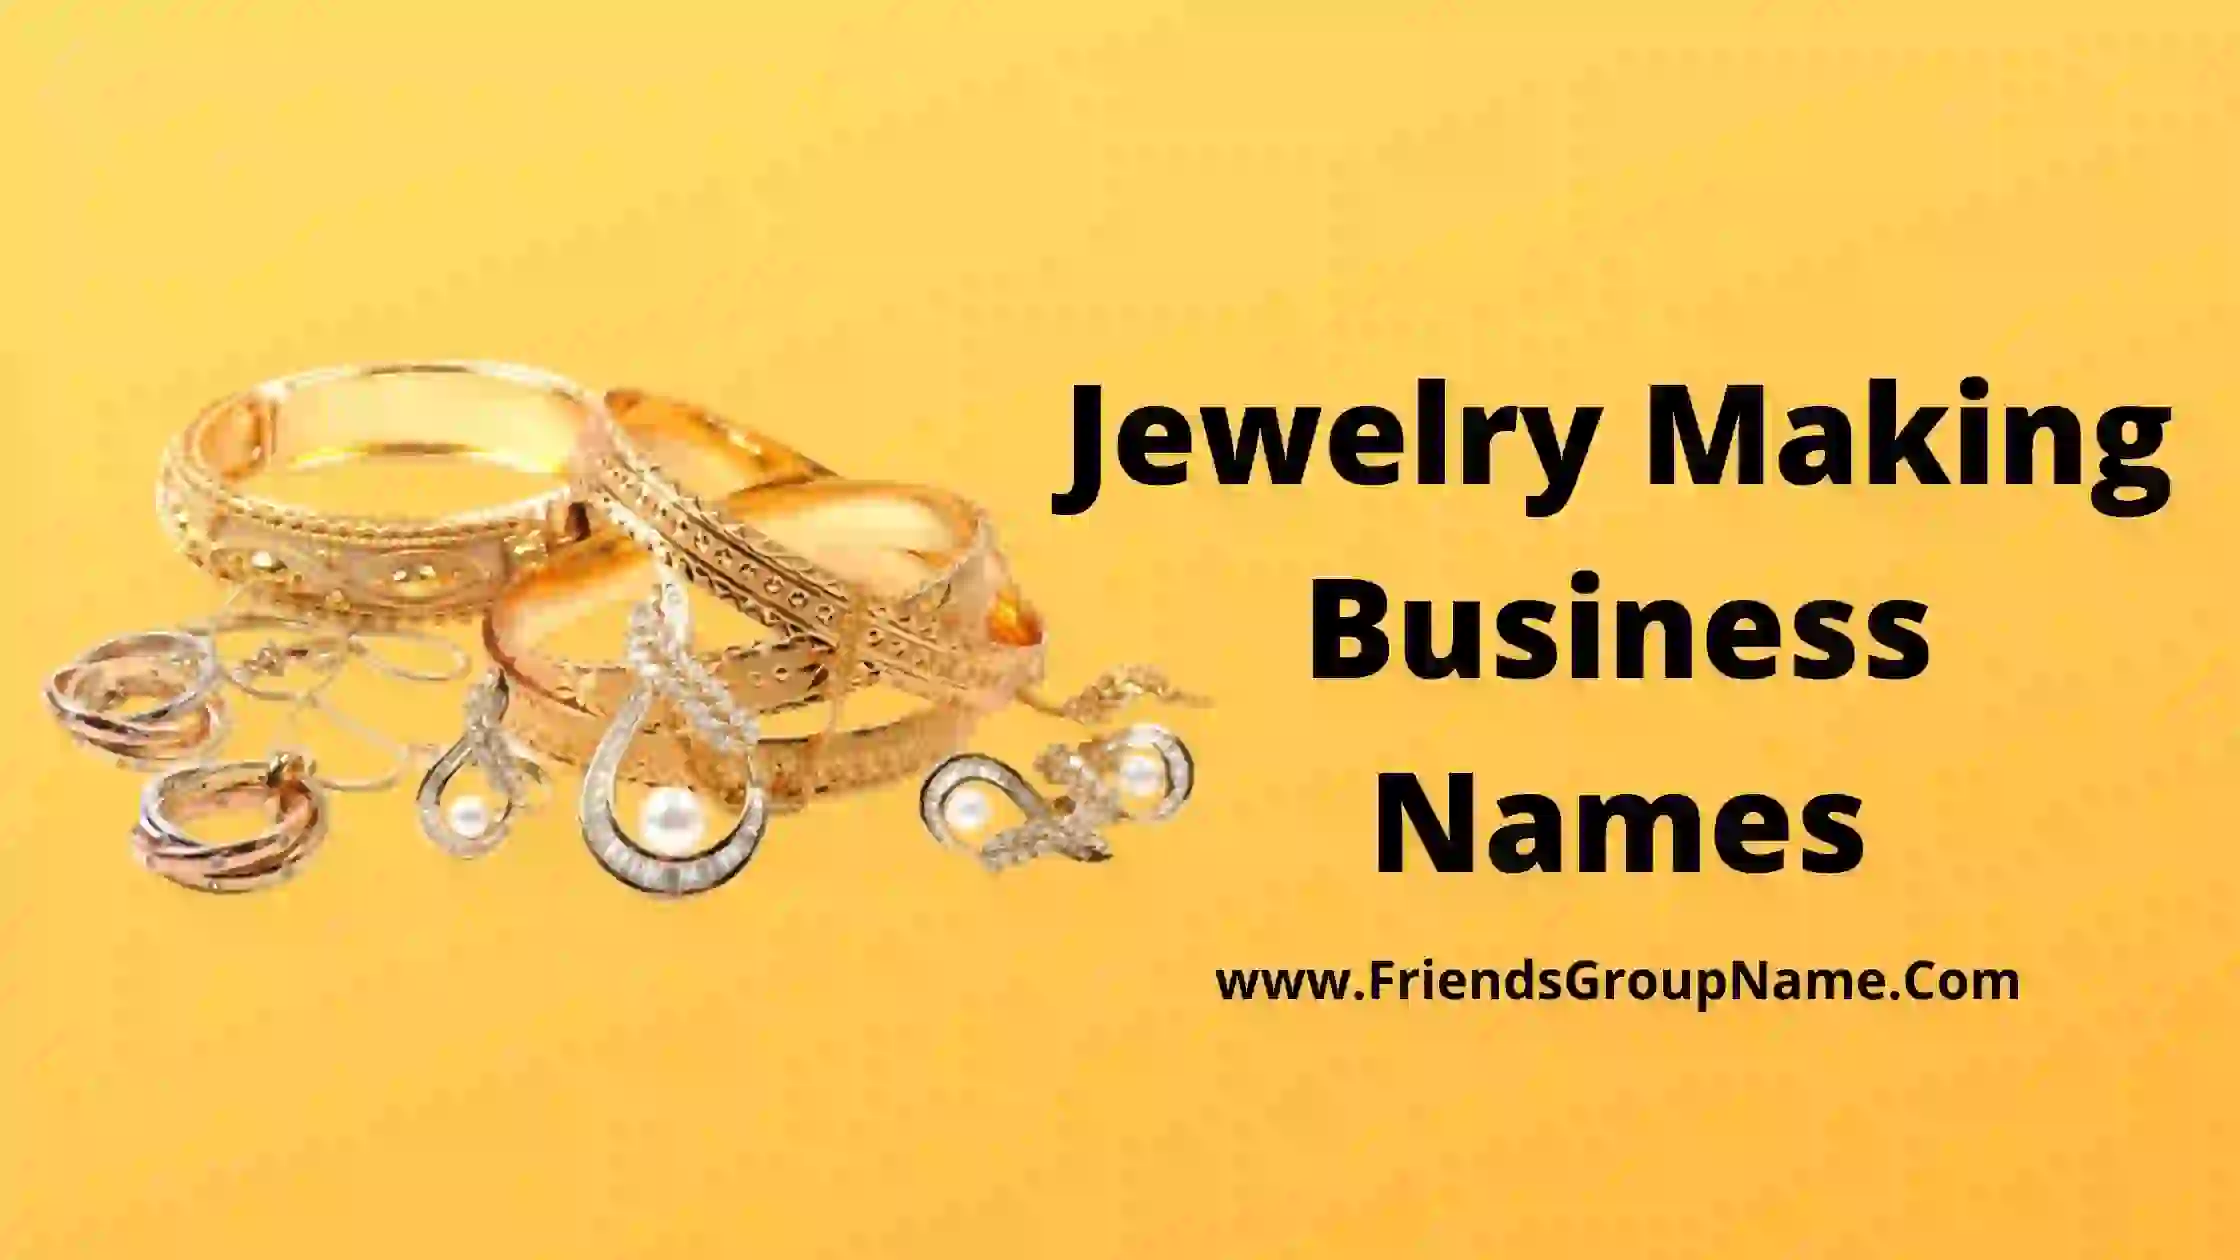 Jewelry Making Business Names